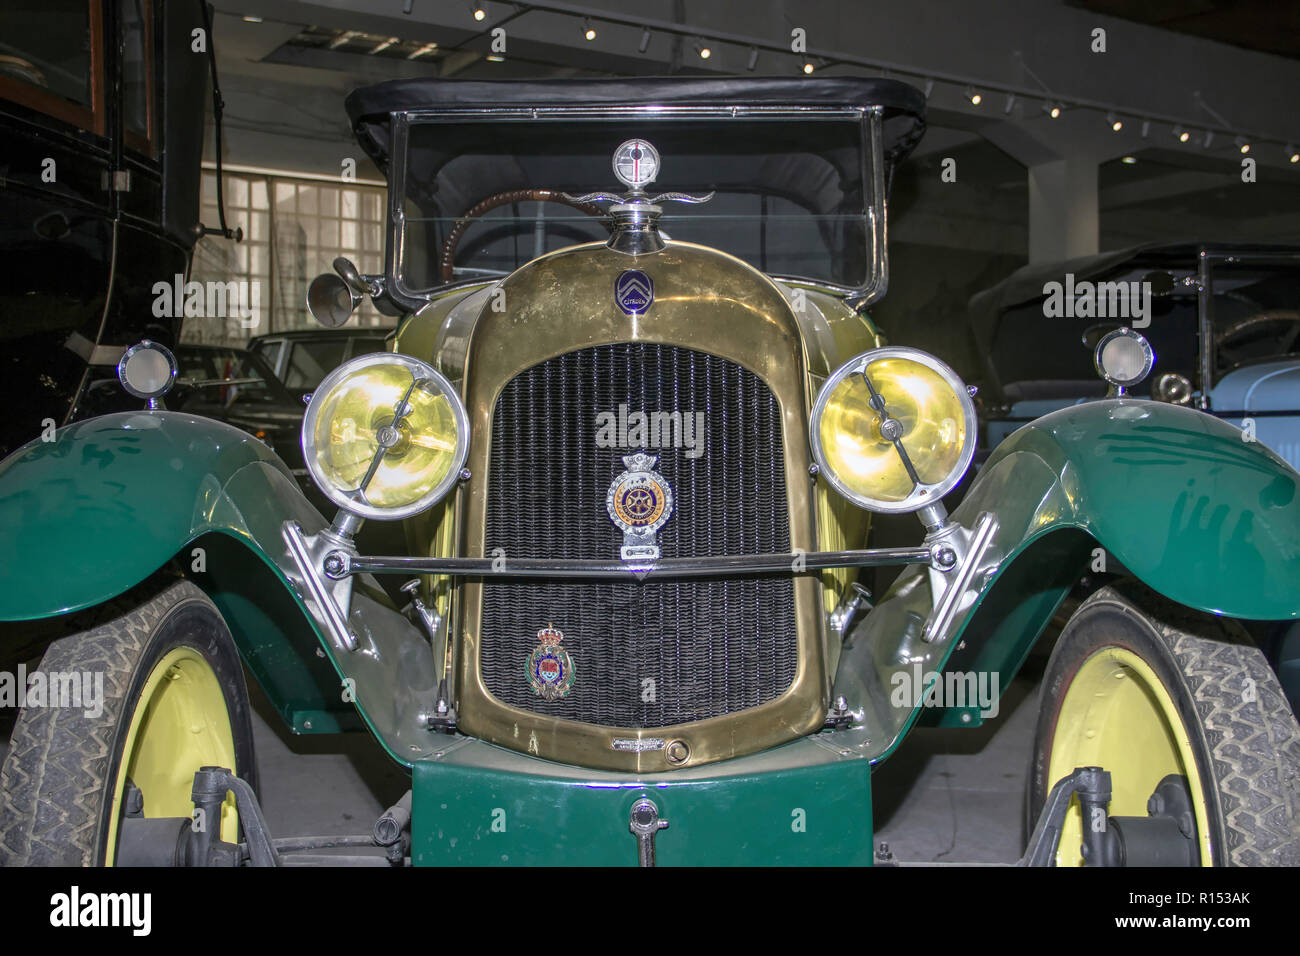 The Automobile Museum, Belgrade, Serbia, August 2018 - Vintage Citroën Type B10 (1925) from the exceptional Collection of Bratislav Petkovic Stock Photo